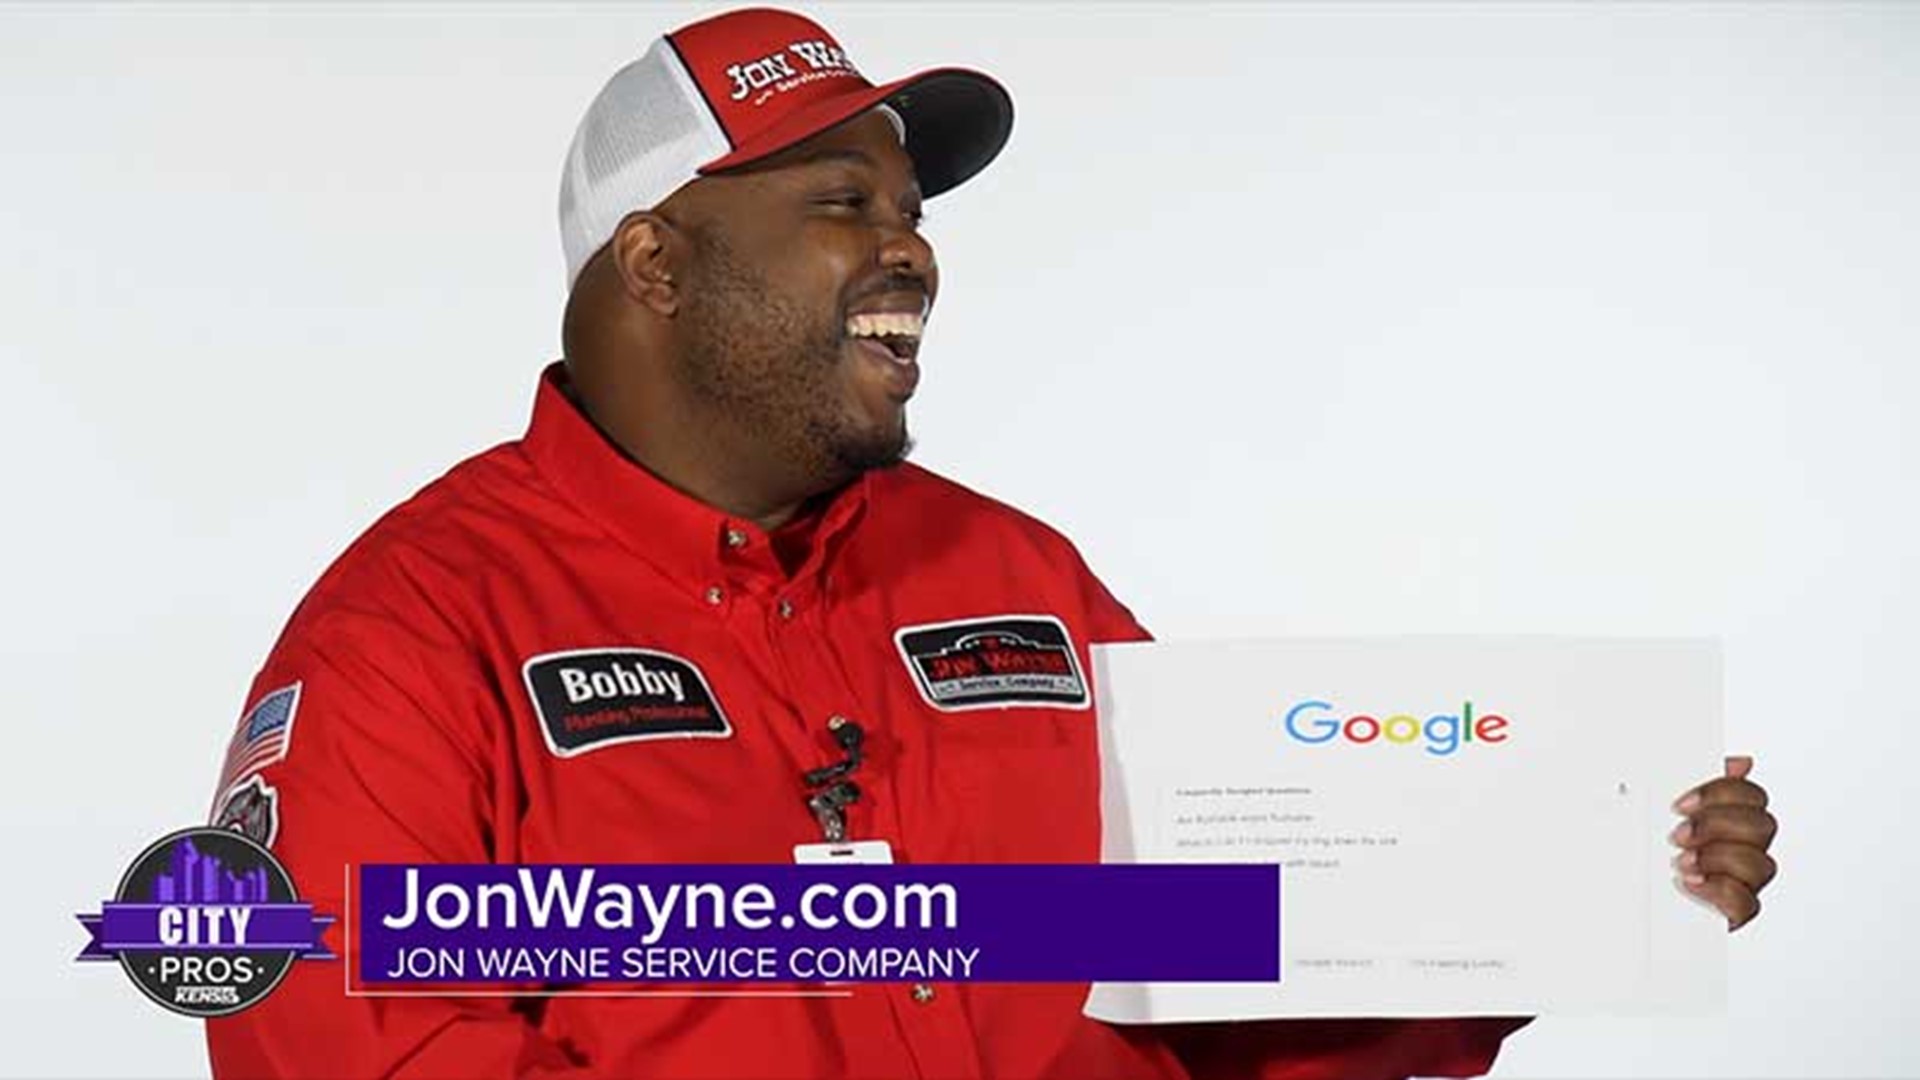 Bobby Terrell is here from Jon Wayne Service Company, our KENS 5 City Pros experts, to answer your "Frequently Googled Questions" about plumbing. To view the entire video, or to schedule a plumbing service call, please visit JonWayne.com.